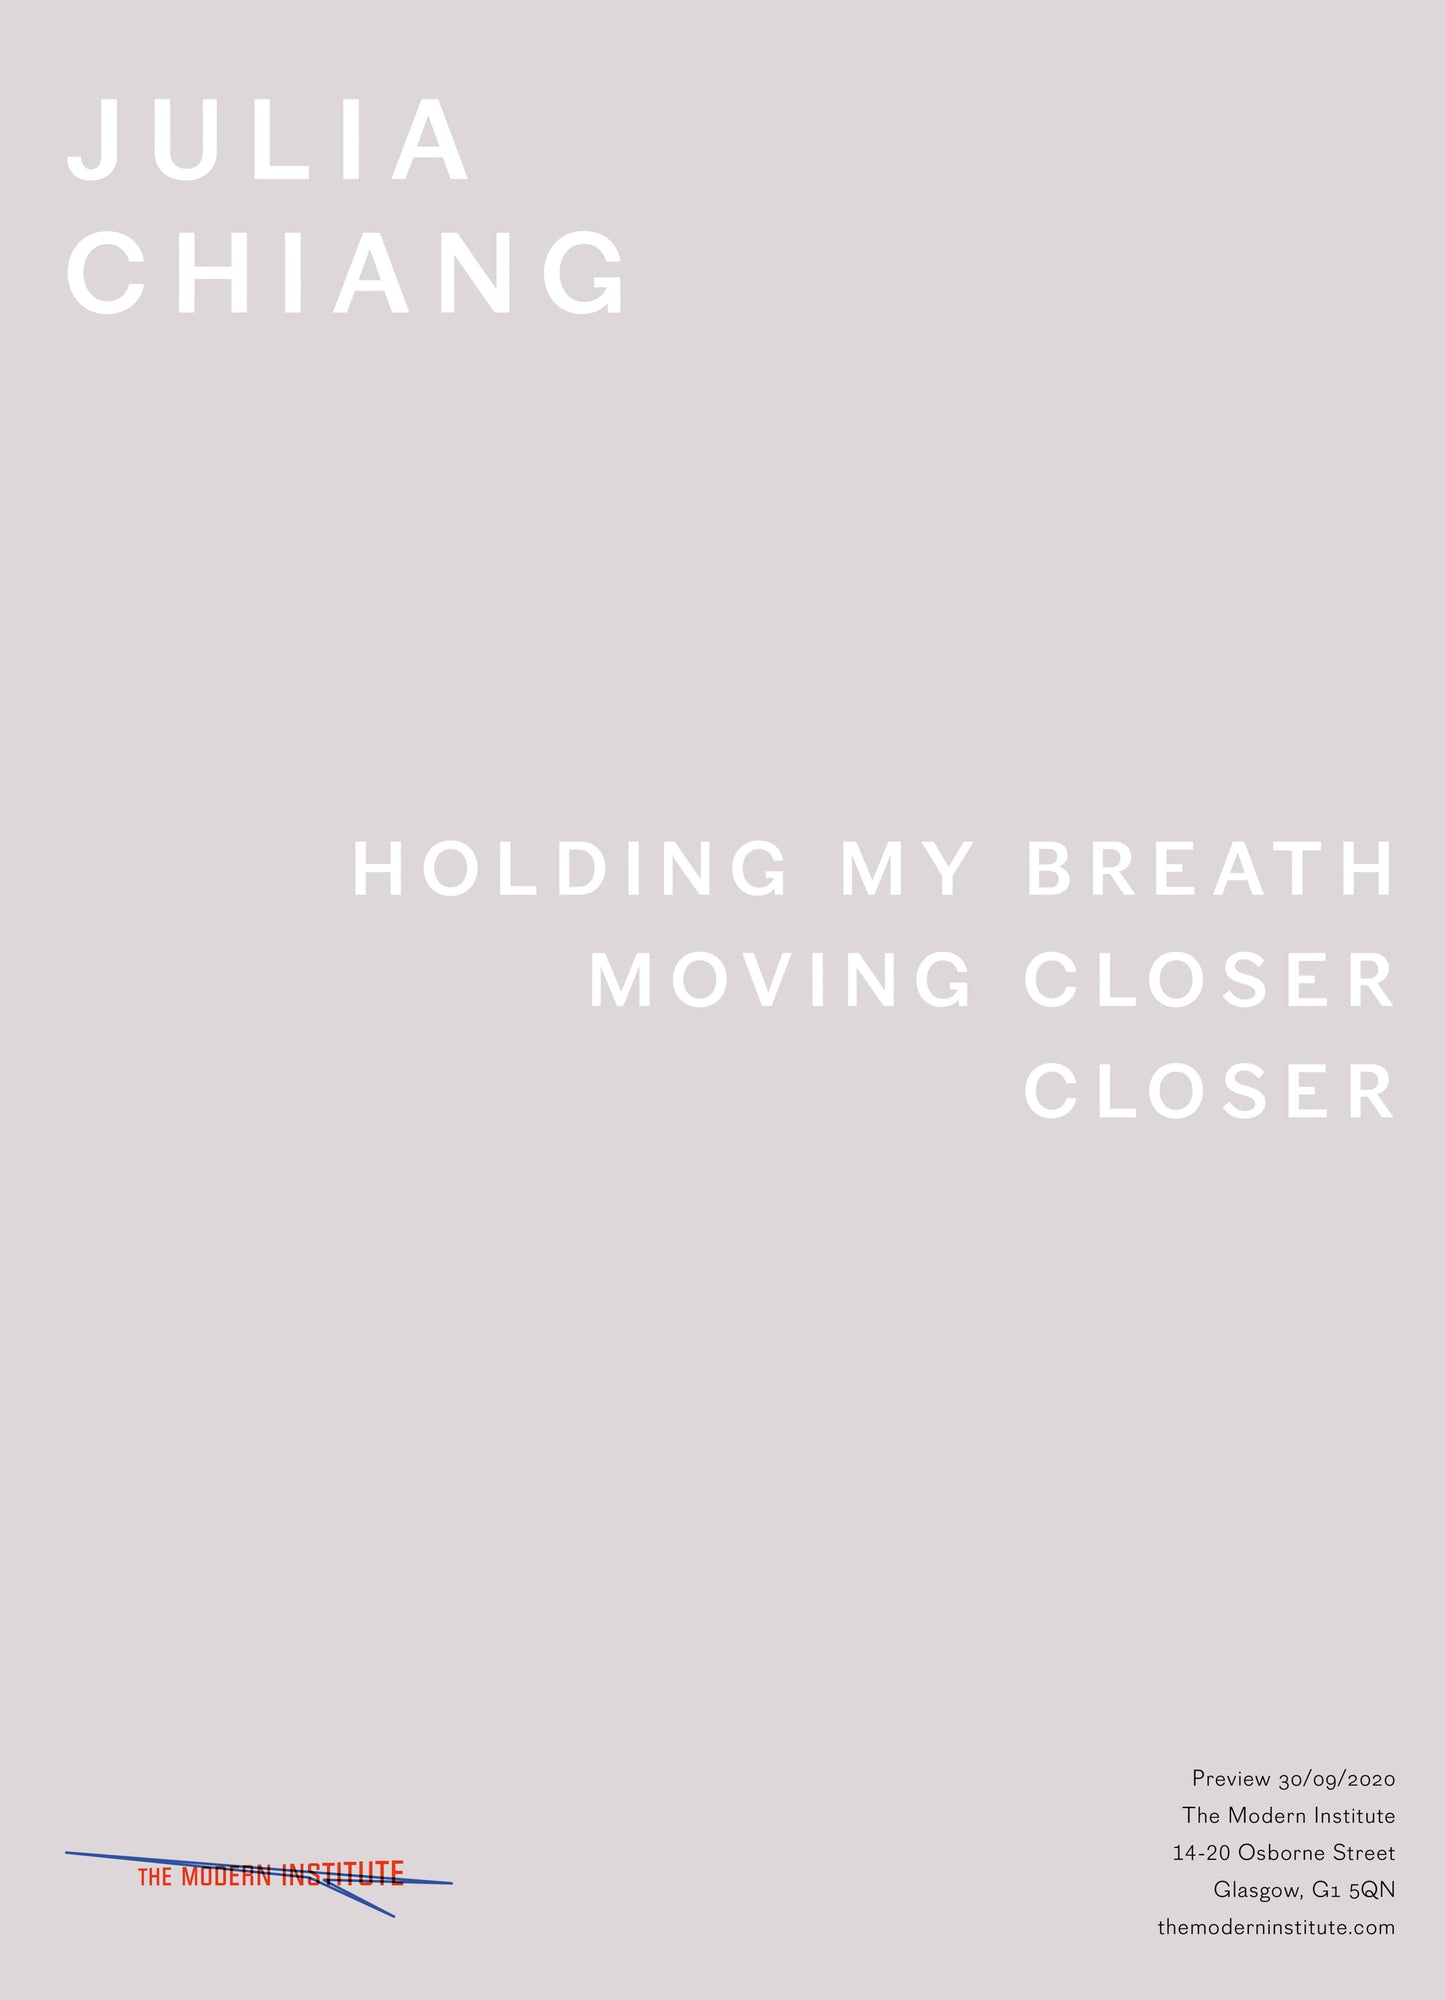 Julia Chiang - Holding My Breath Moving Closer Closer